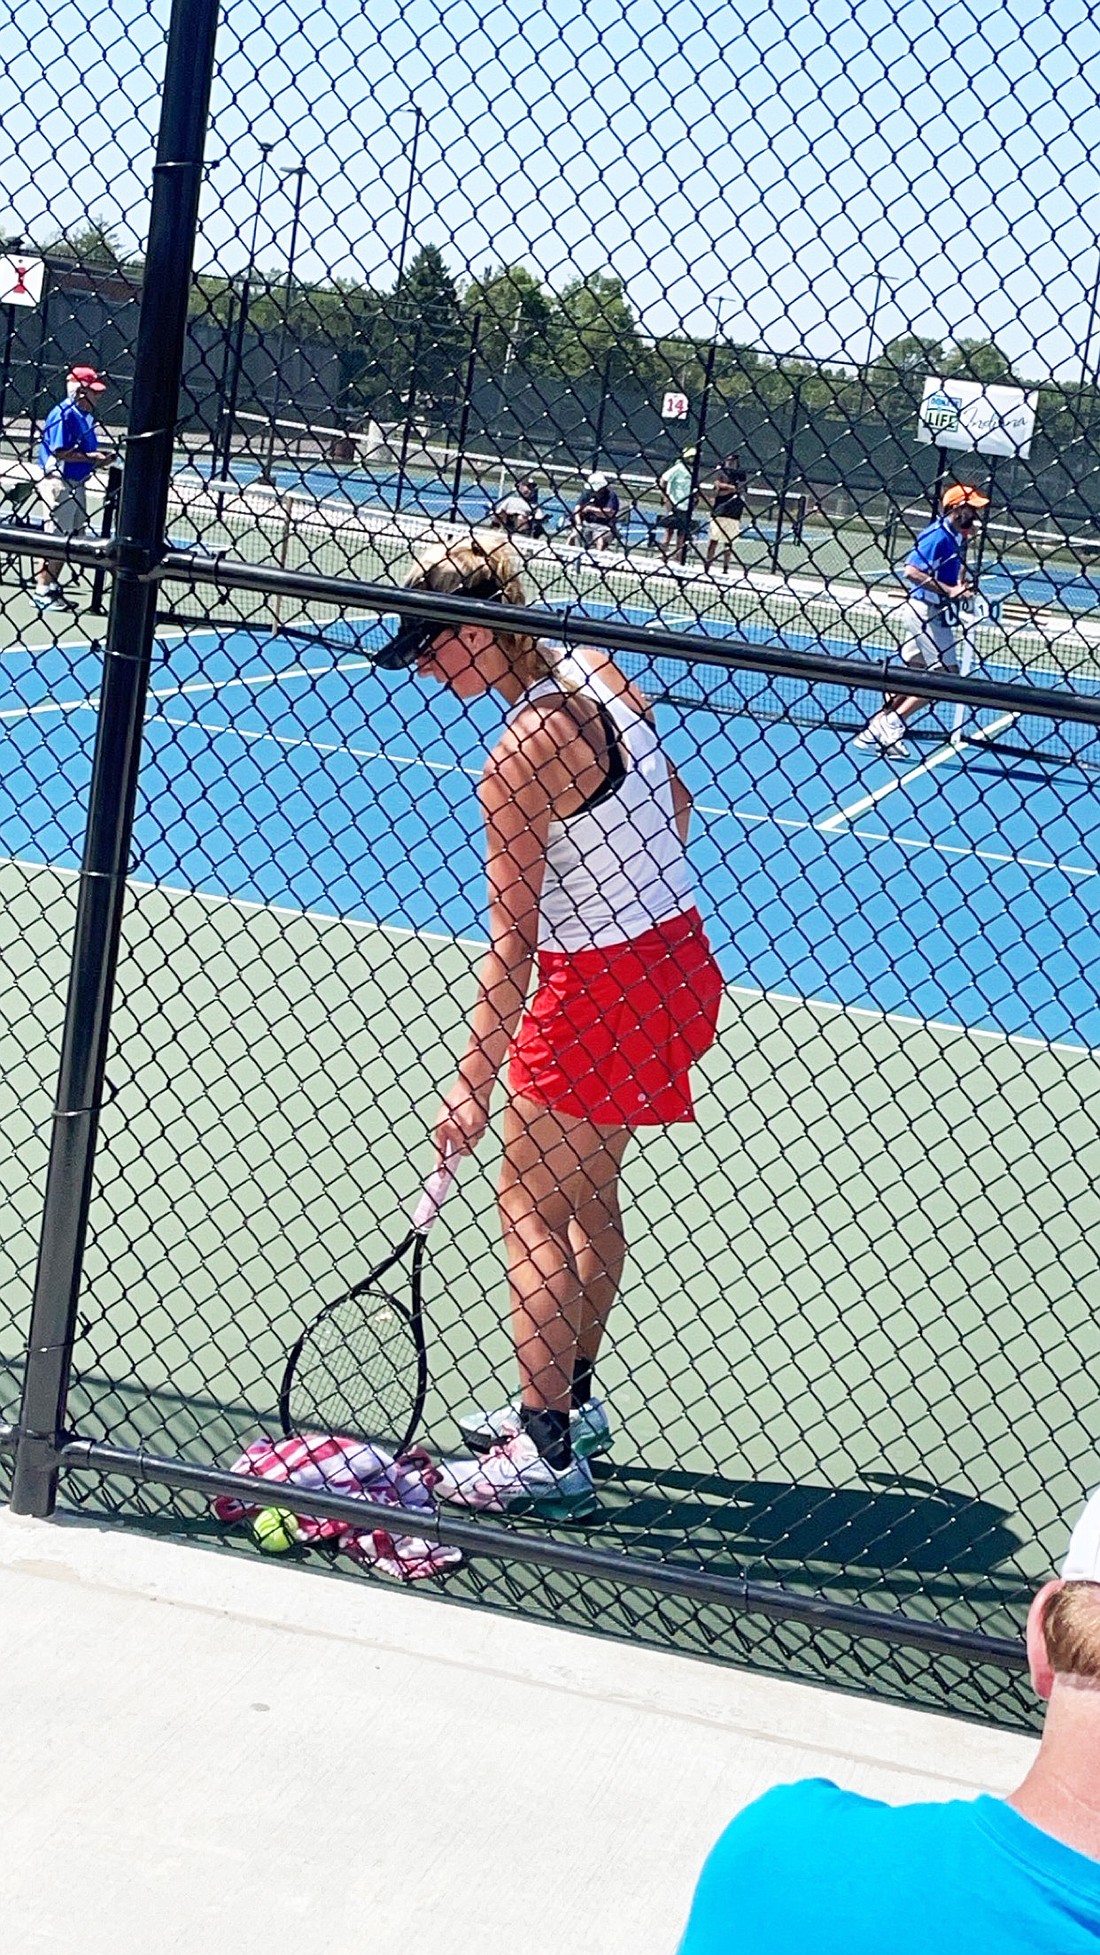 Warsaw junior tennis player Addie Lind takes a break in between points at the IHSAA individual tennis state finals Friday at North Central High School in Indianapolis.